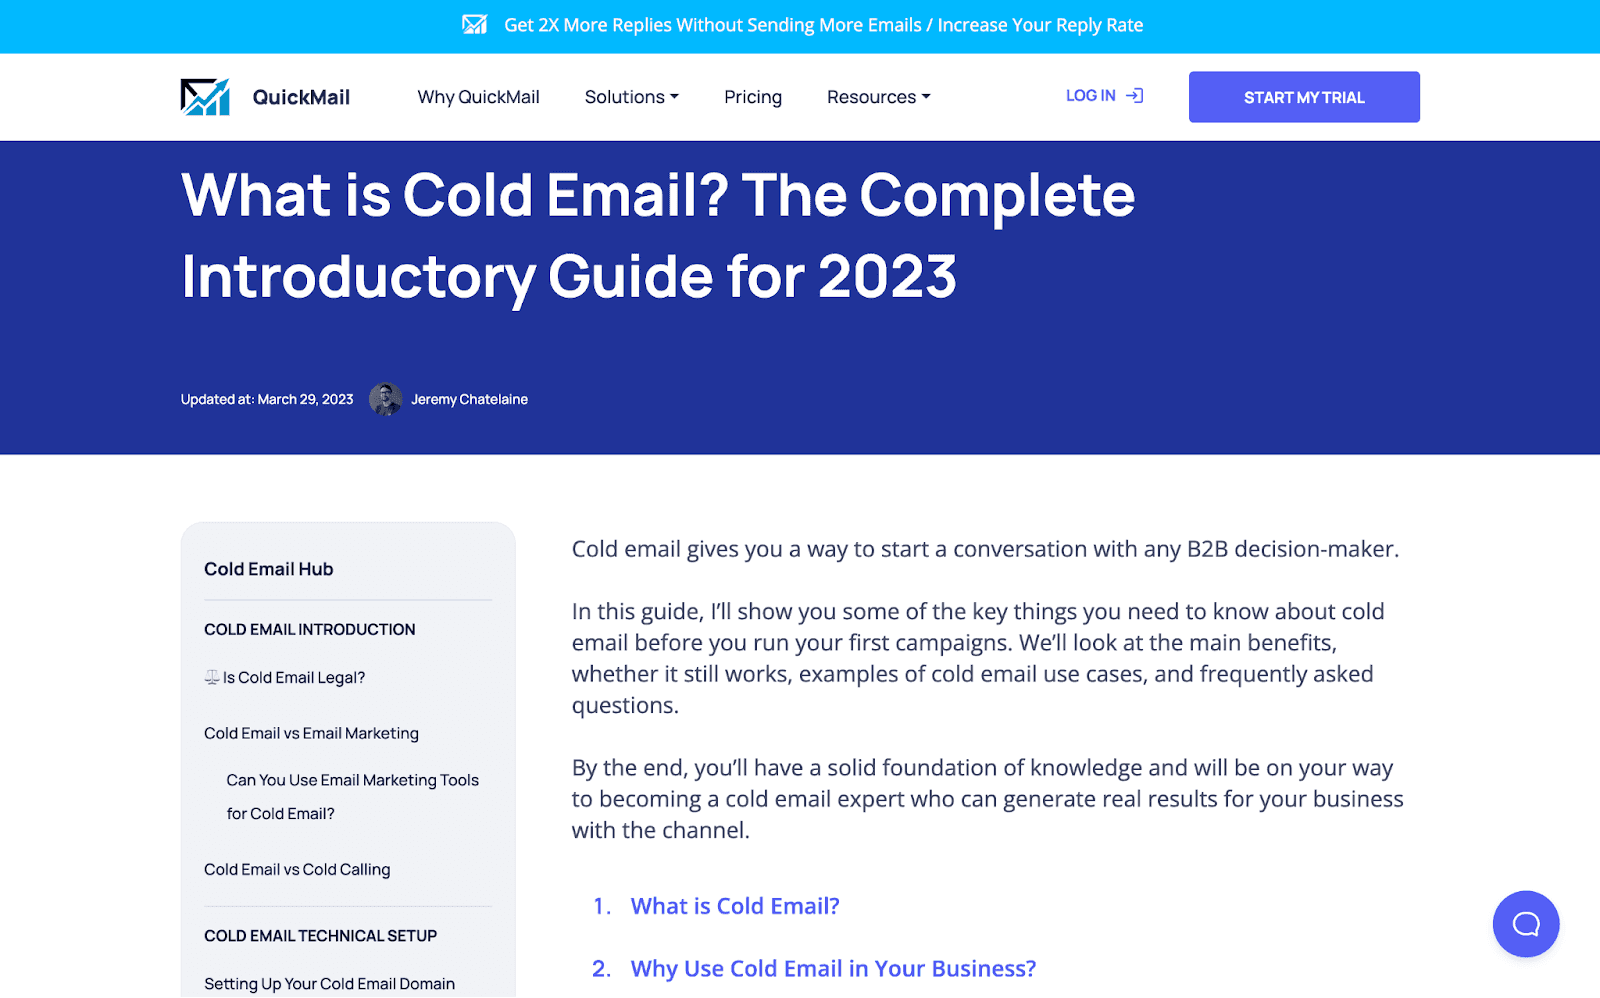 A post by quickmail explaining what cold email is and a complete introductory guide for 2023.